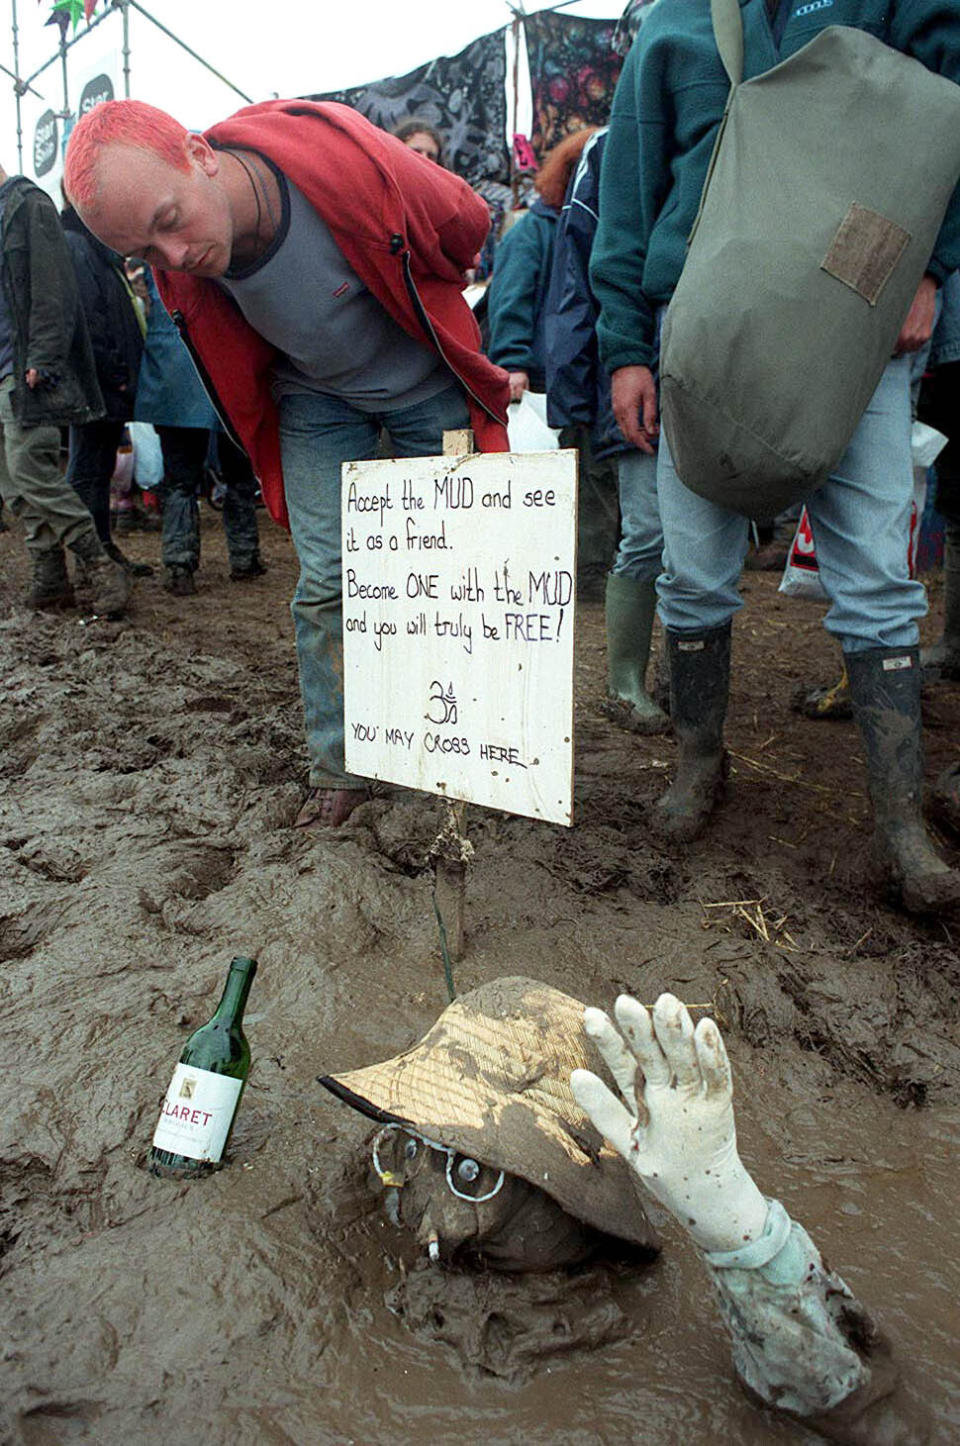 A sign tells festival-goers in 1997 to ‘accept the mud and see it as a friend’. (Jon Mills)